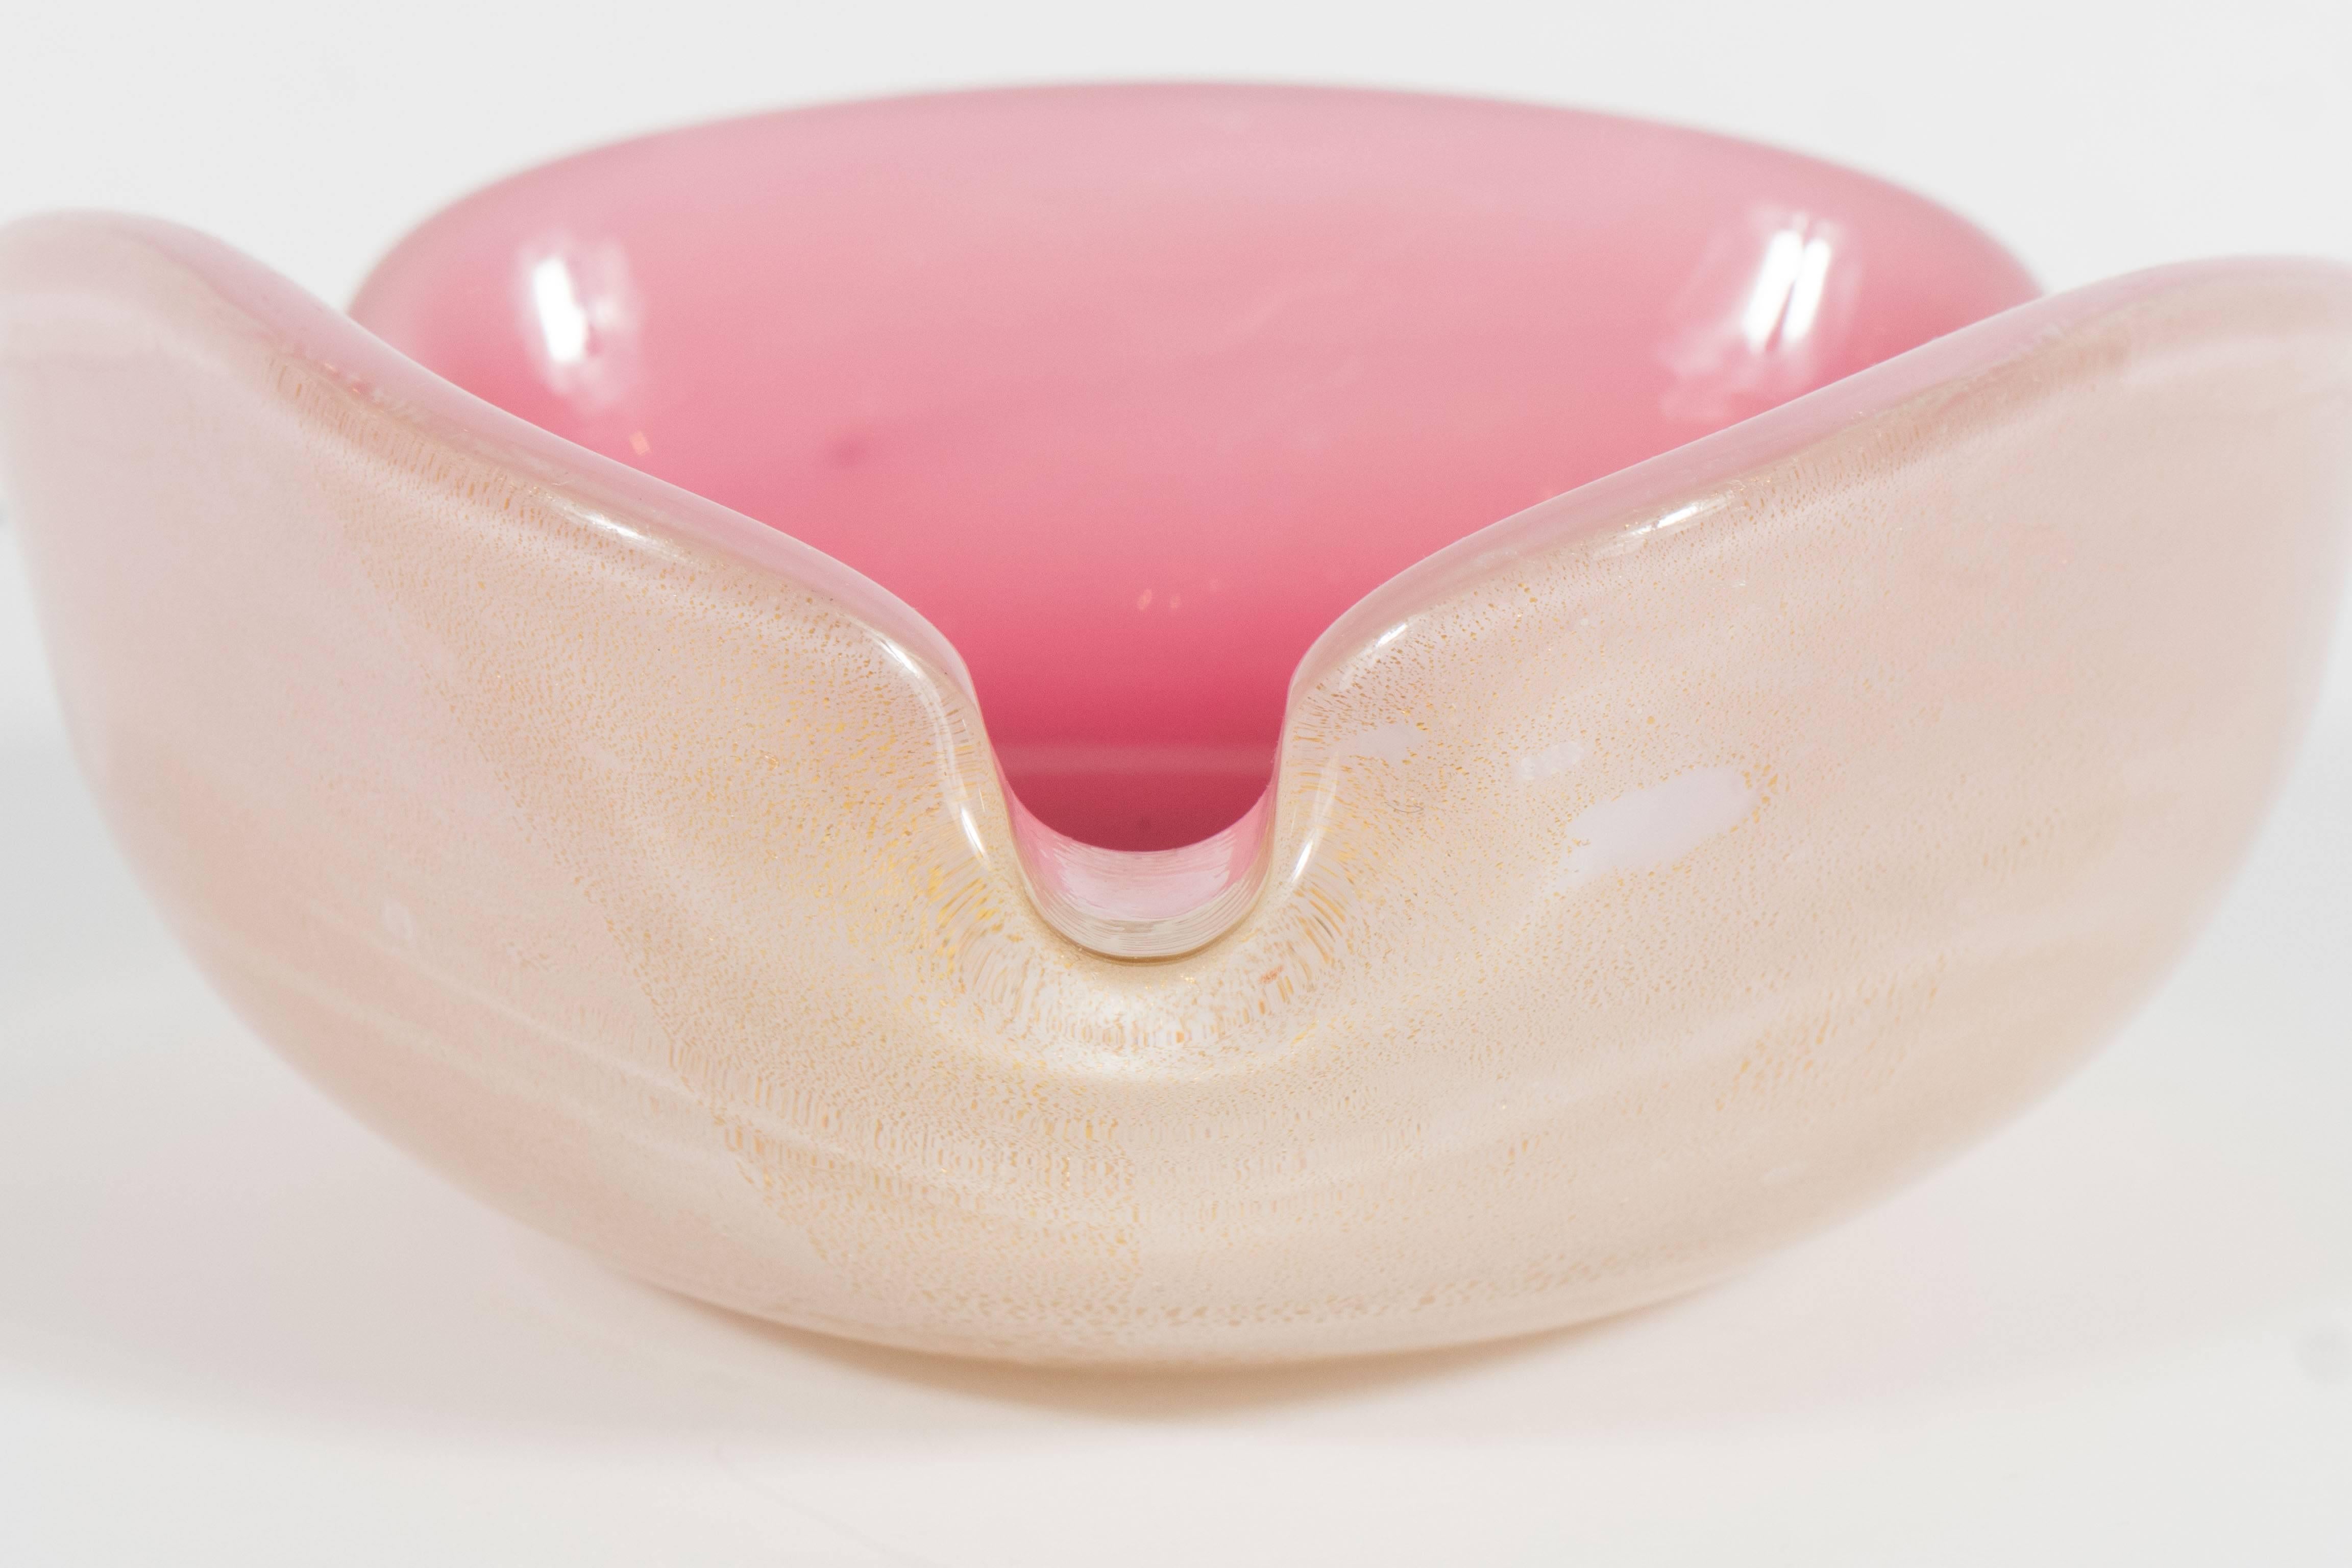 Italian Handblown Murano Glass Ashtray in Hues of Rose and Pink with Yellow Gold